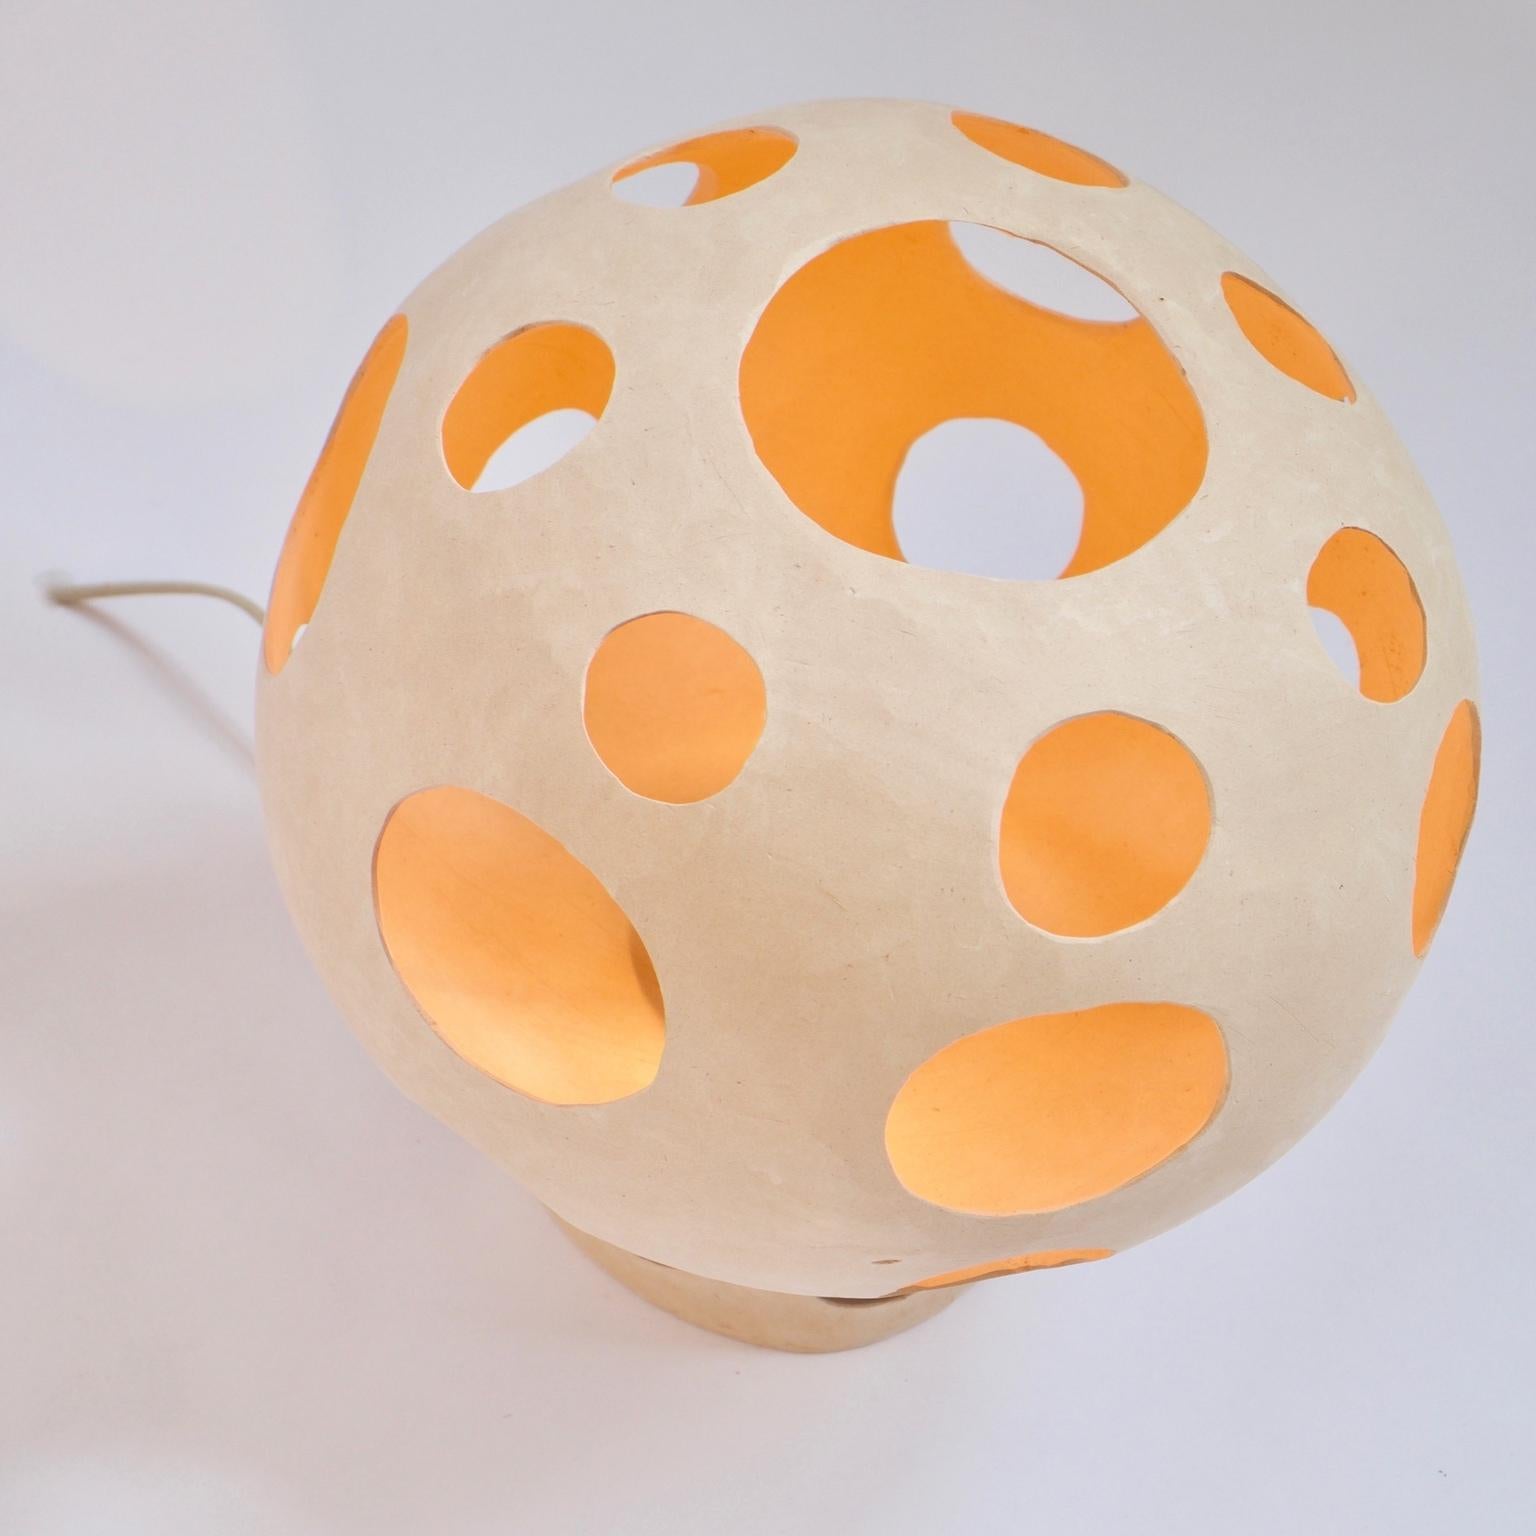 Persimmon is a mushroom-shaped hand-built ceramic table lamp whose plinth base and socket cover are integrated into the main body making one seamless sculptural ceramic shell. The cutouts on the body add character and project multiple round spots of